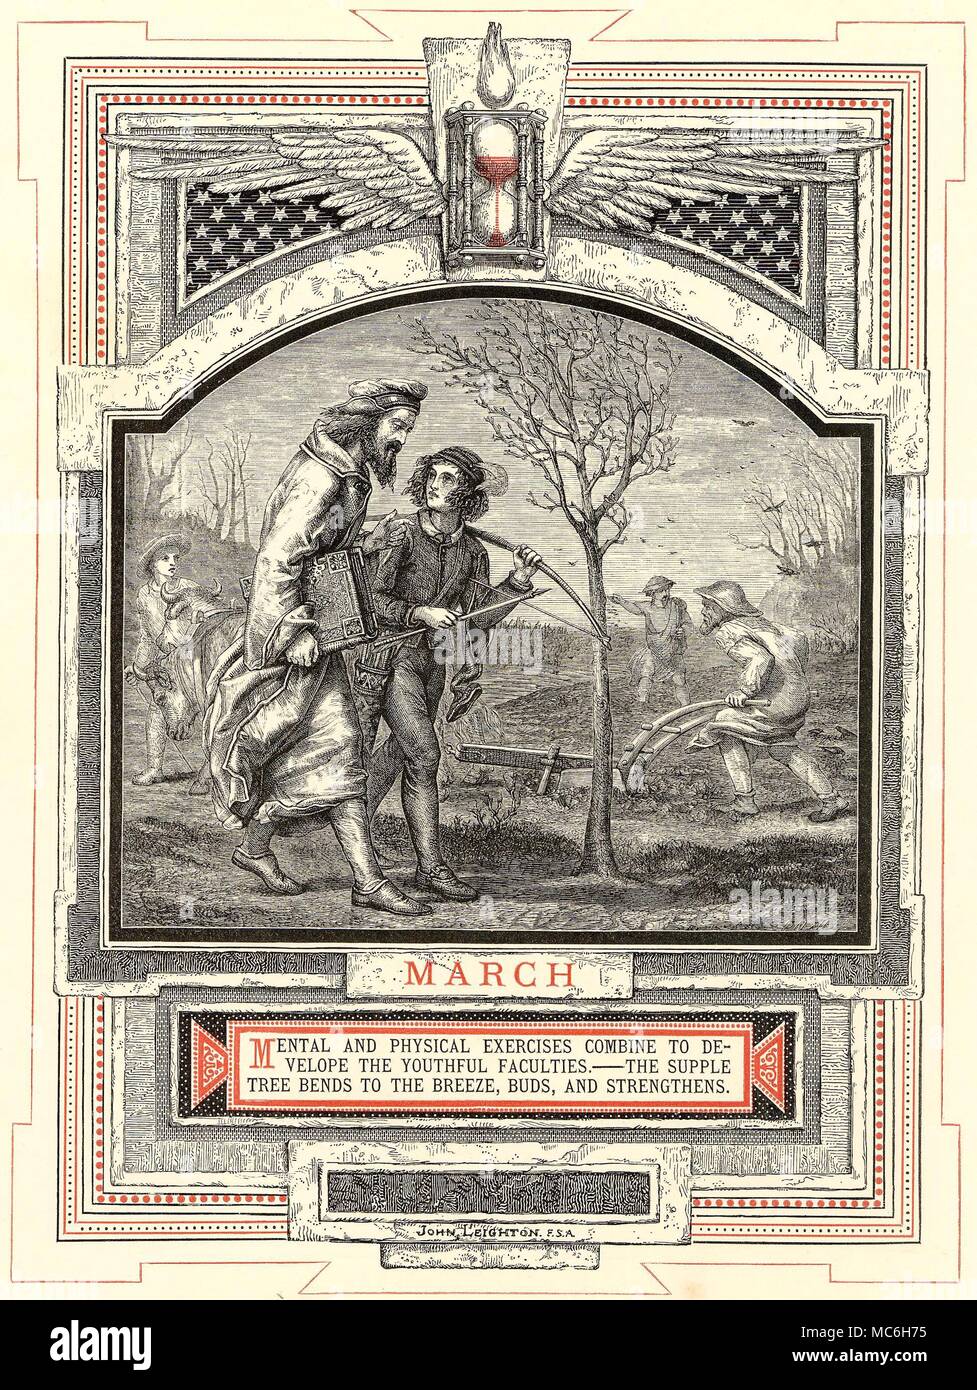 ASTROLOGY - MONTHS OF THE YEAR - MARCH The month of March, from the series by John Leighton, The Life of Man, 1866. The twelve signs (in this case Pisces) are associated with each of the months during which the Sun is in this zodiac sign. A distinctive stage in the twelve stages of Man's life is also linked with the image - in this case, March is linked with the Stripling and Apprentice. By the third month of the year, the winged hour-glass is running. Stock Photo